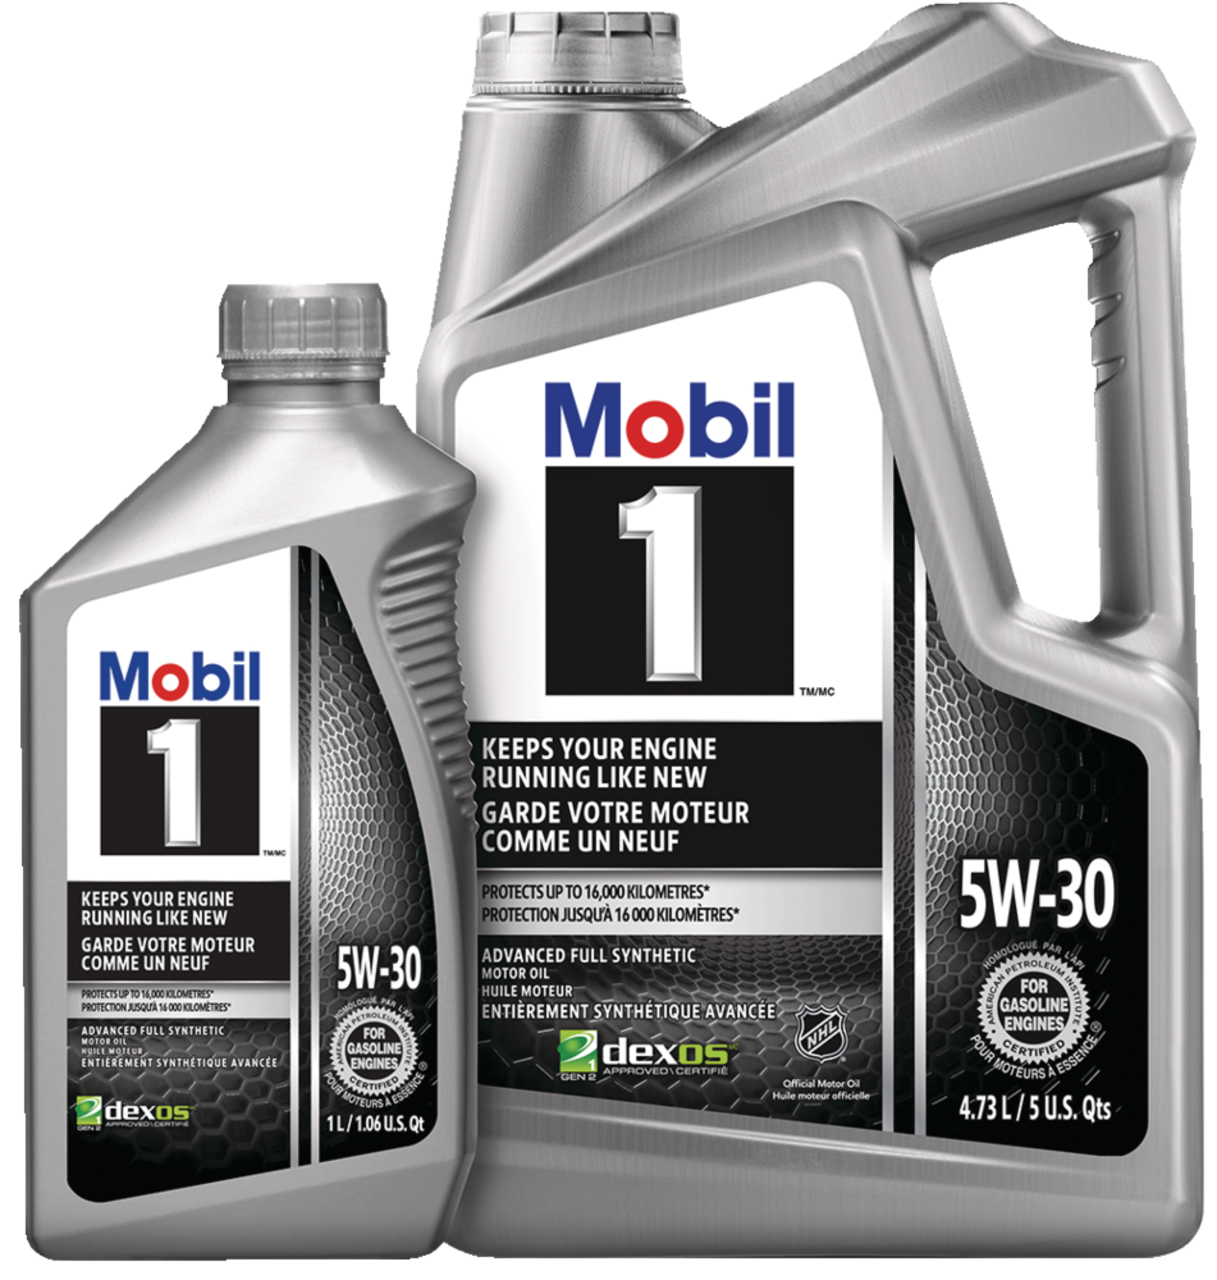 Mobil 1™ 5W30 Synthetic Engine/Motor Oil Set, 4.73-L + 1-L